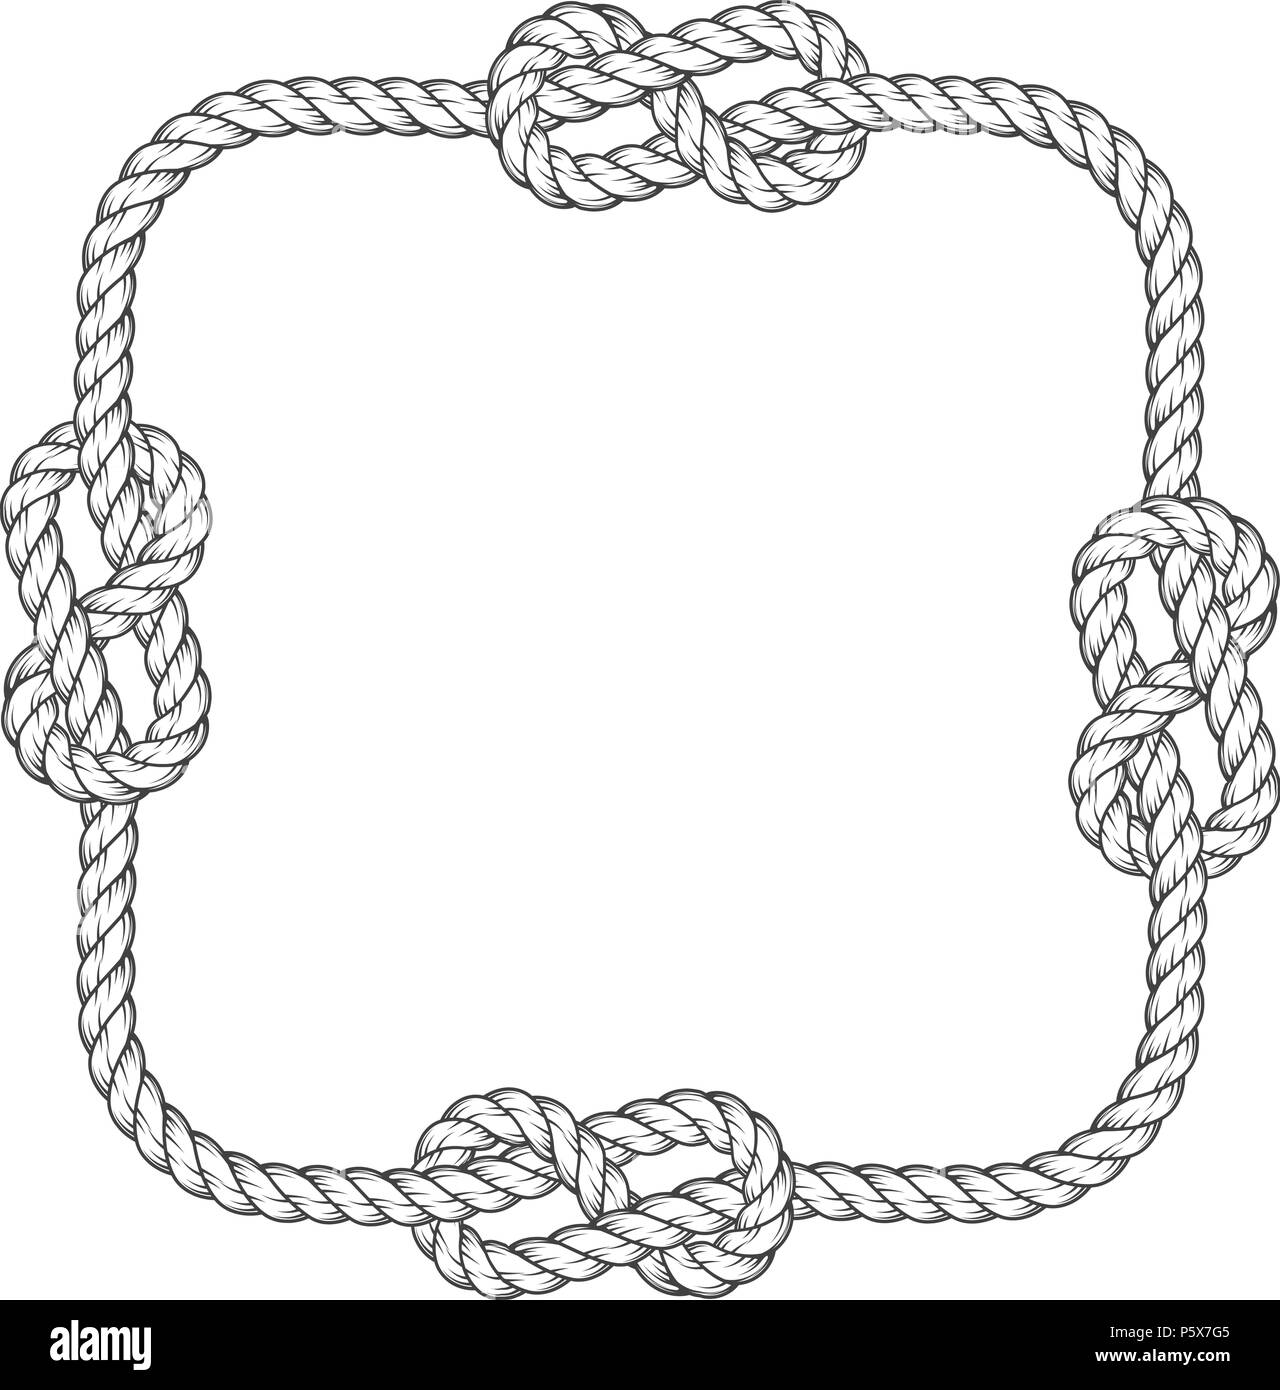 Rope frame - square rope frame with knots, vintage style Stock Vector